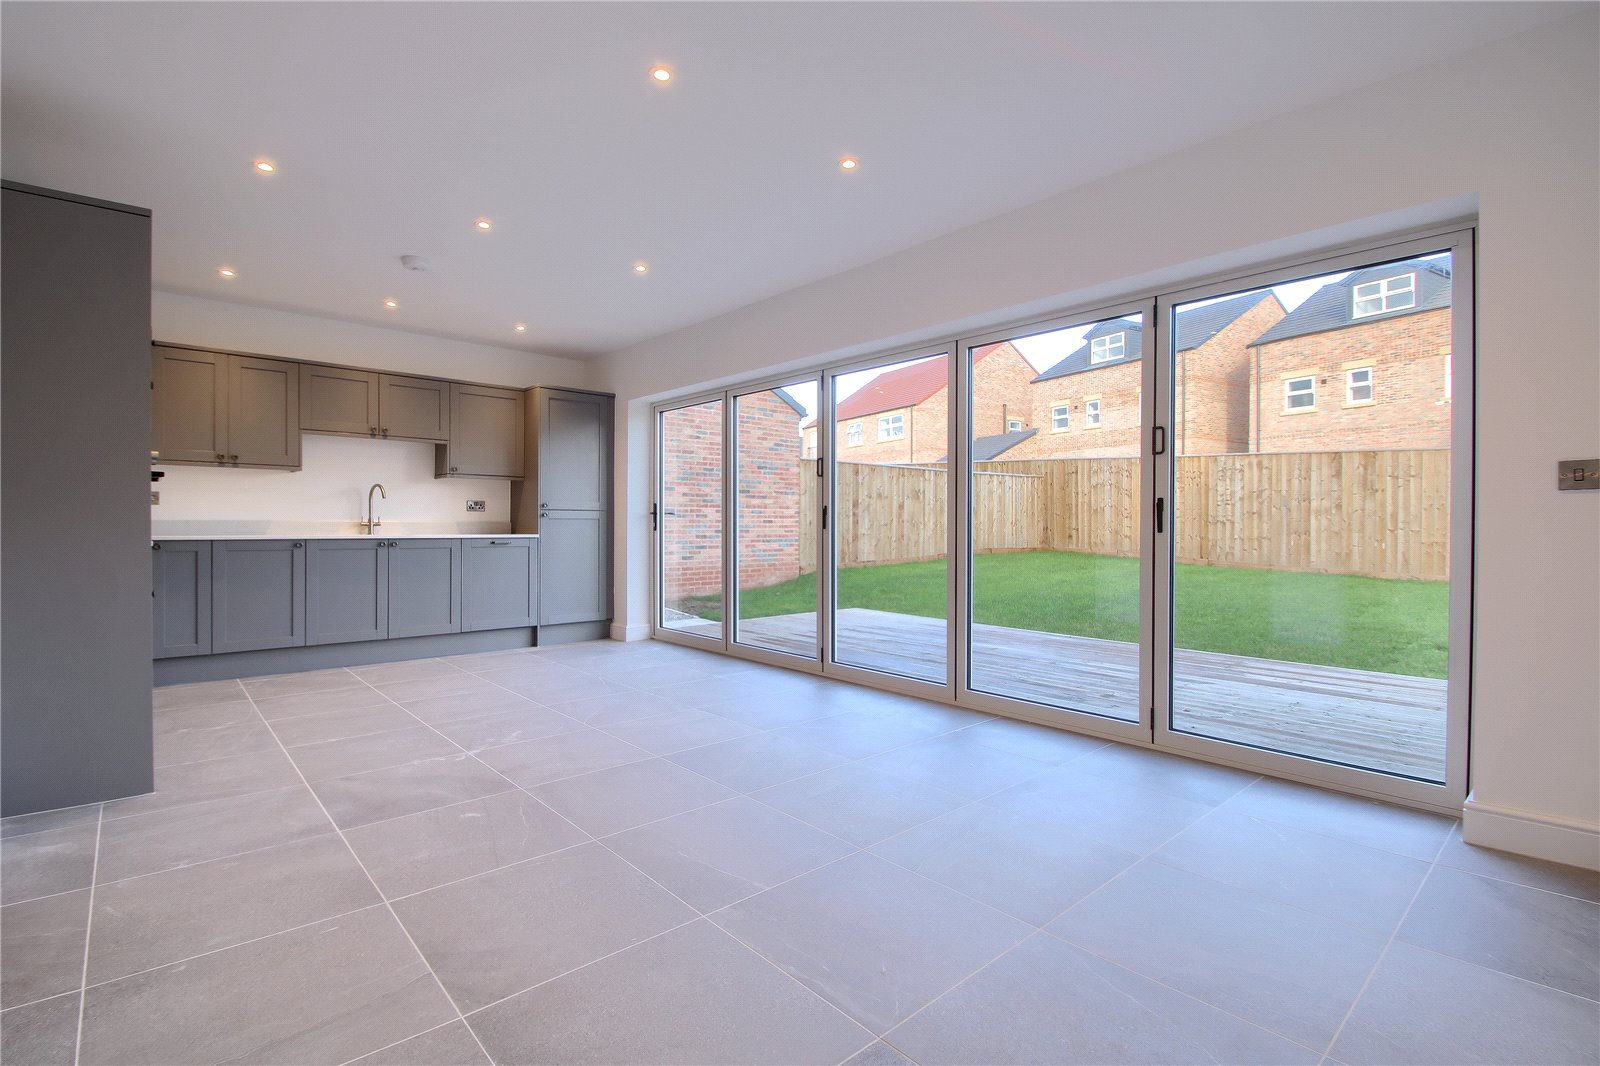 4 bed house for sale in Hunters Way, Eaglescliffe  - Property Image 2